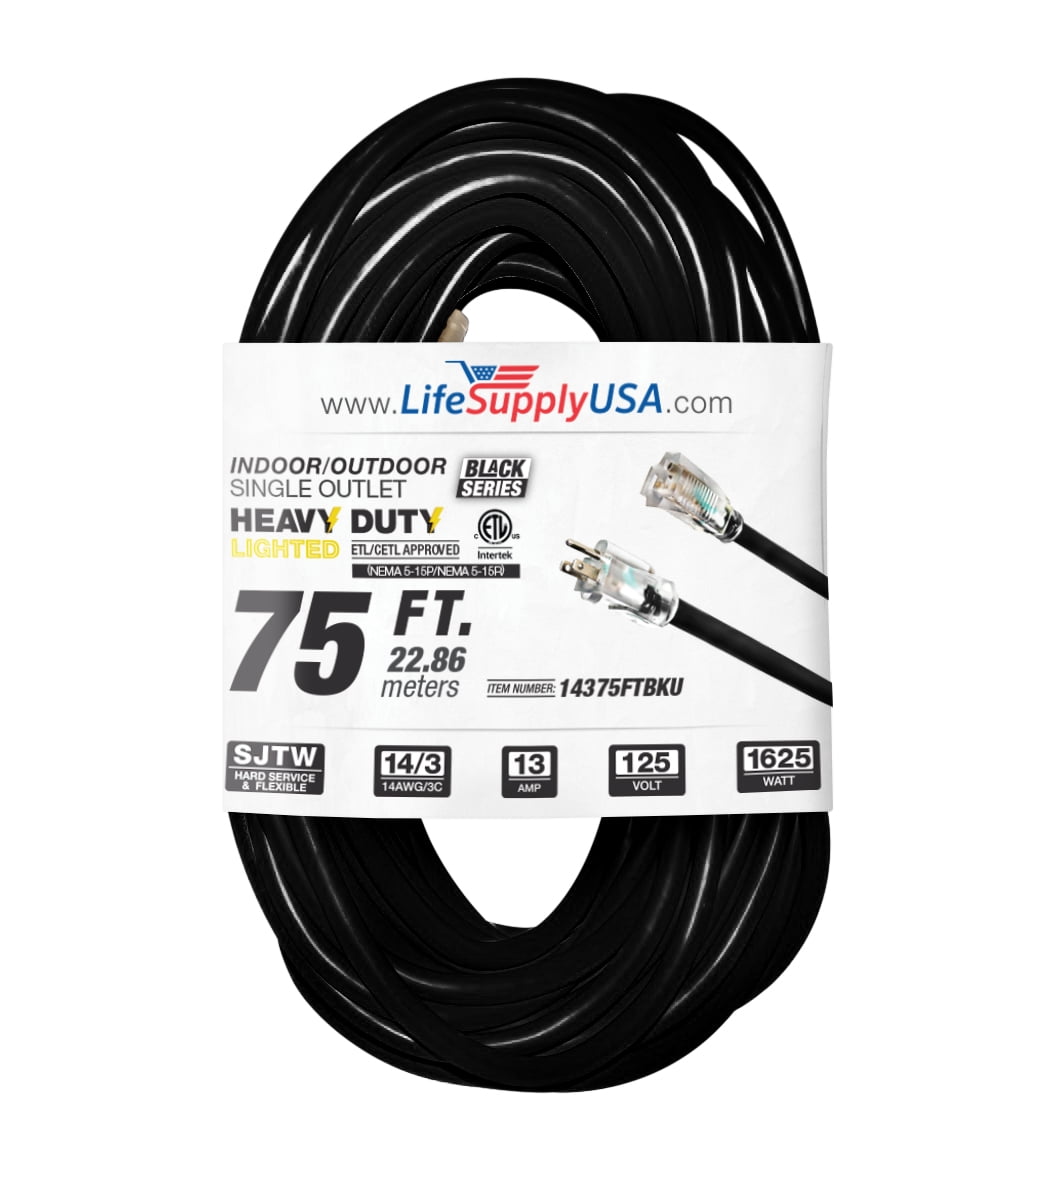 75 ft Power Extension Cord Outdoor  Indoor Heavy Duty 14 gauge/3 prong SJTW  (Black) Lighted end Extra Durability 13 AMP 125 Volts 1625 Watts ETL listed  by LifeSupplyUSA